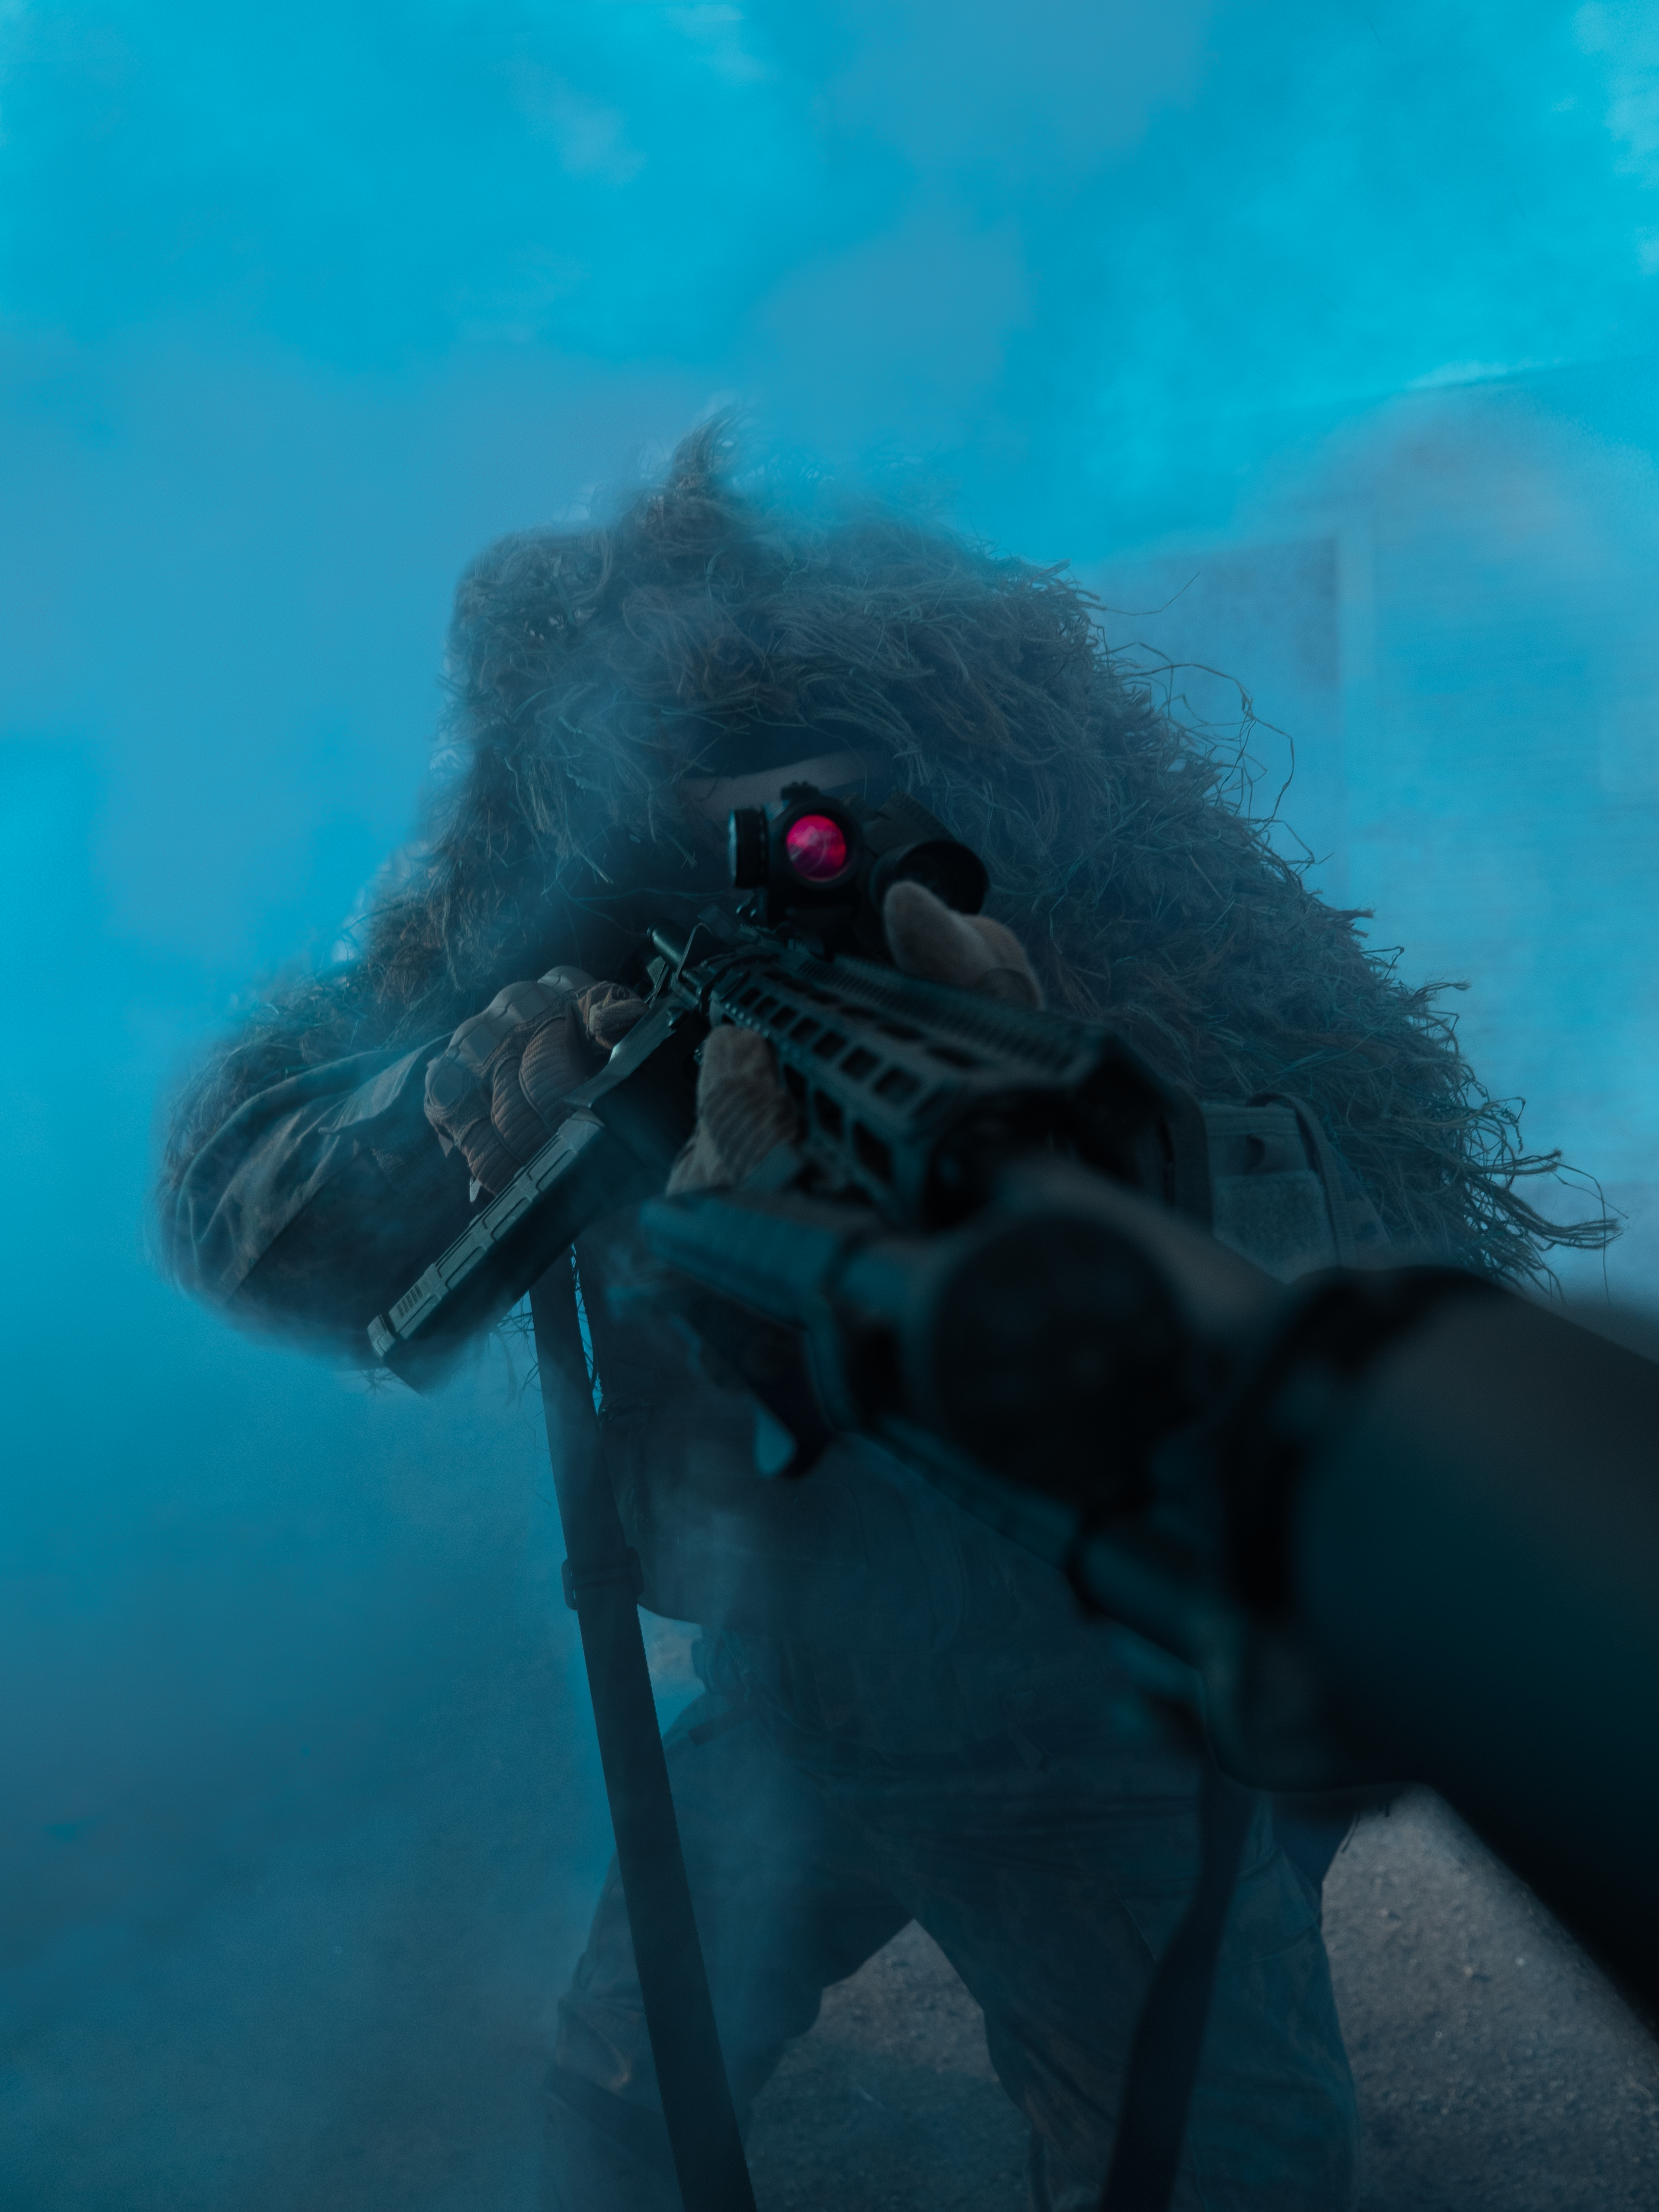 Man standing in blue smoke with a rifle in hand.